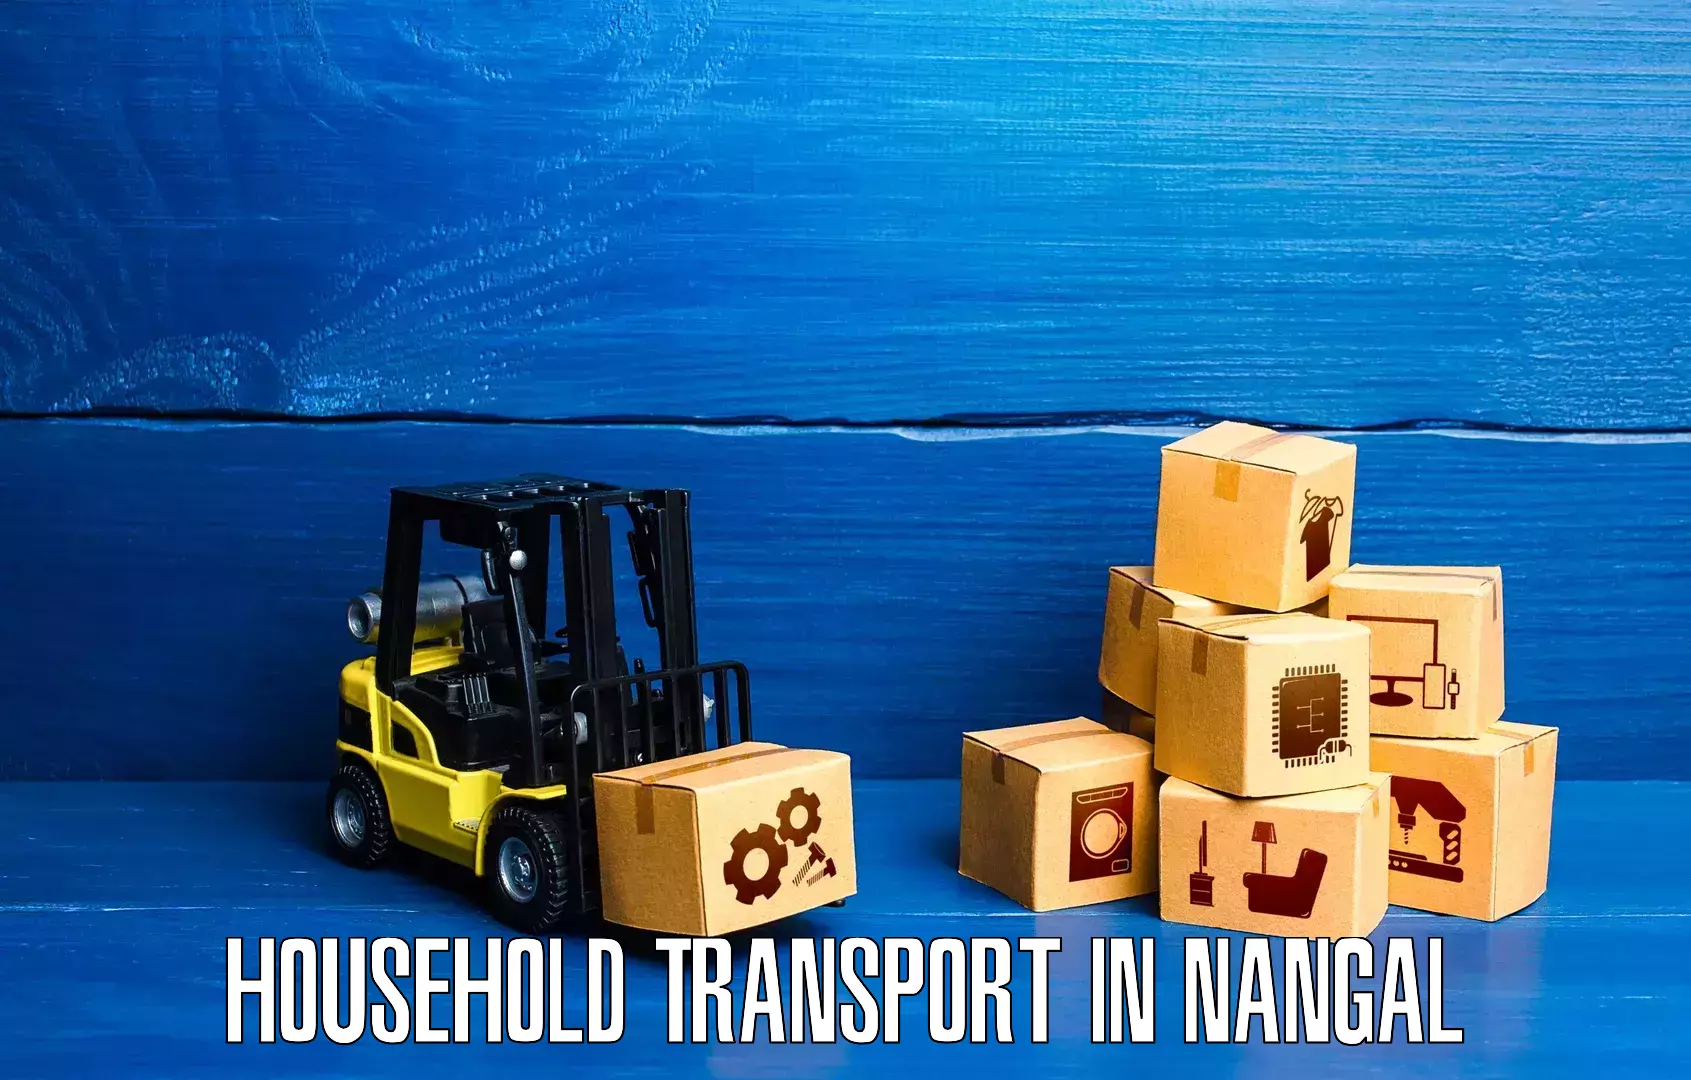 Quality household transport in Nangal